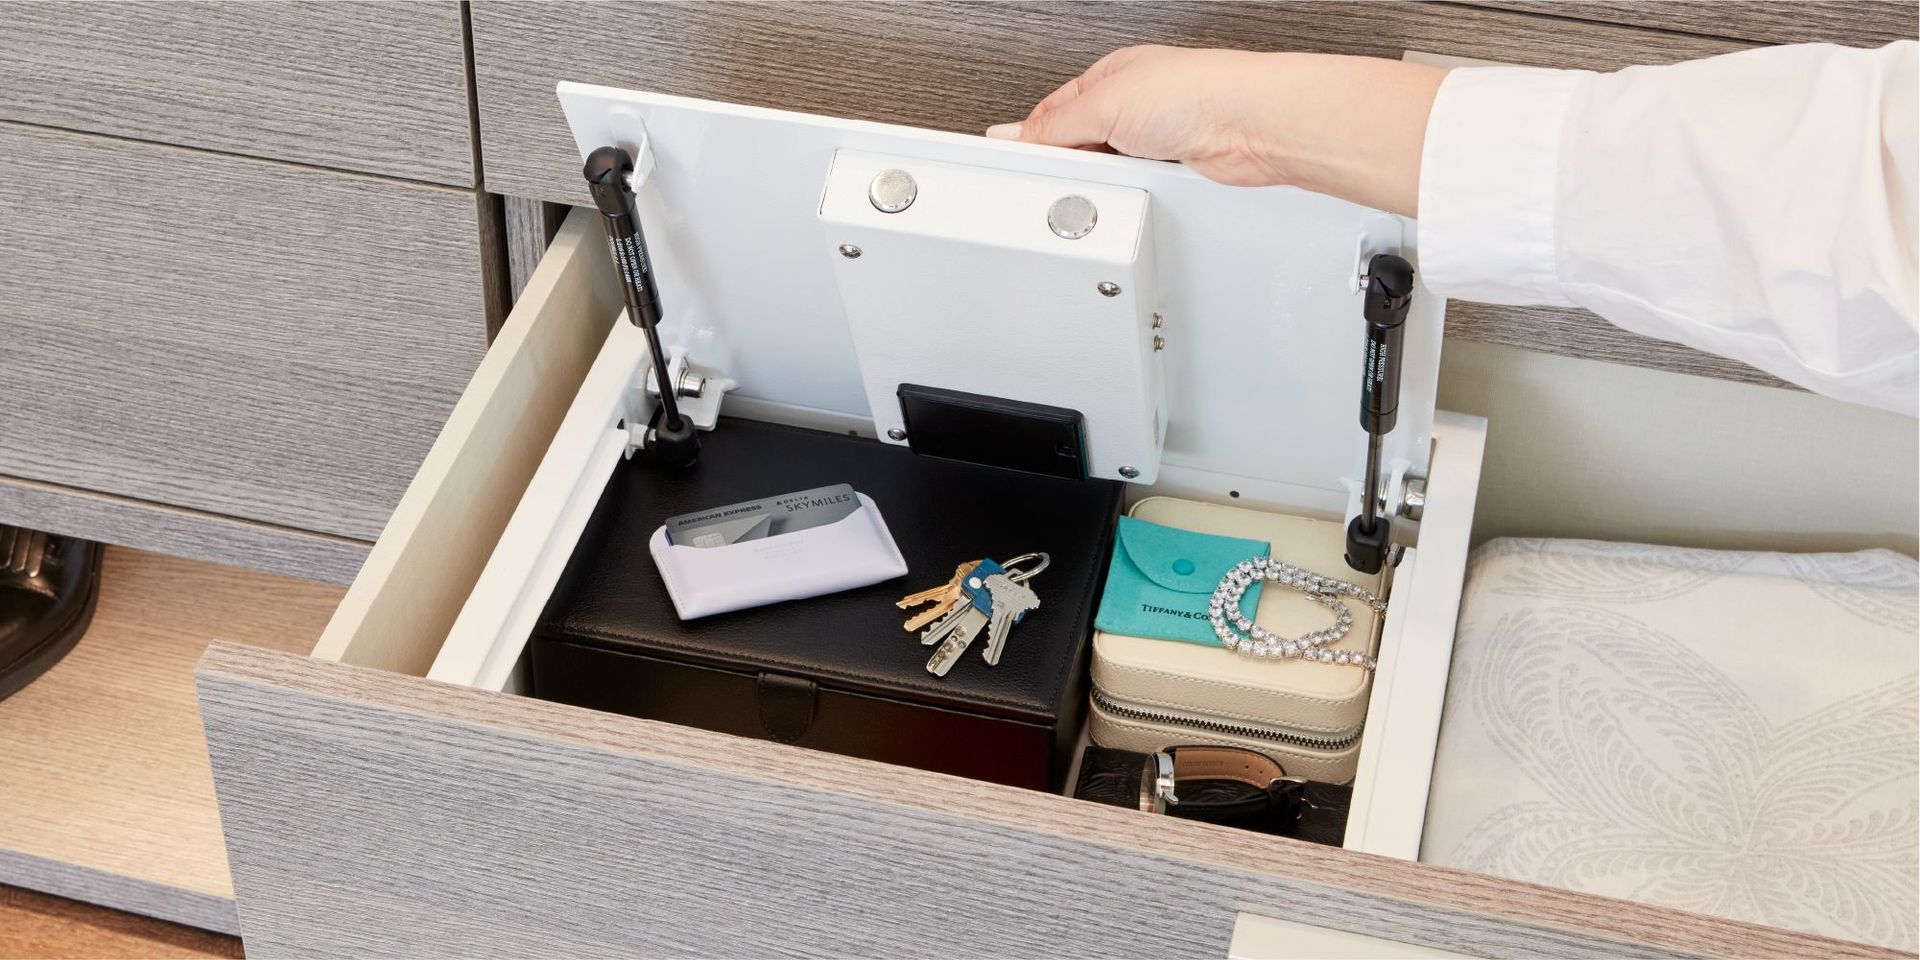 Craziest Places People Have Hidden Safes in news